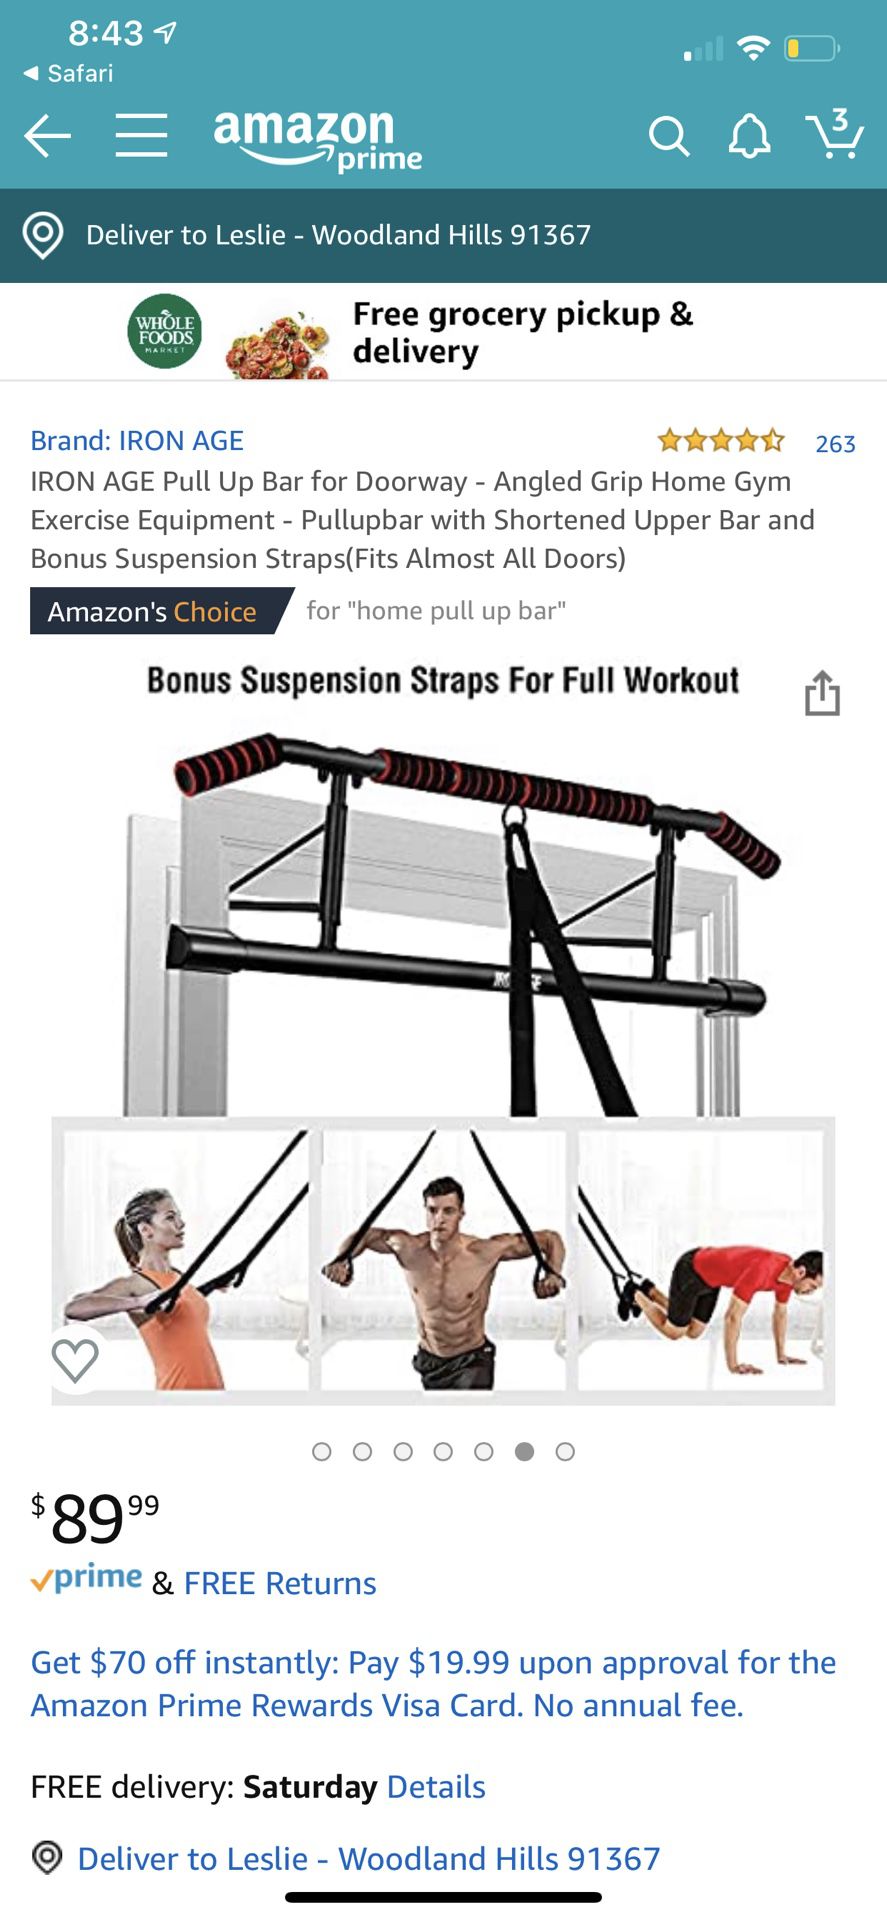 IRON AGE Pull Up Bar for Doorway - Angled Grip Home Gym Exercise Equipment - Pullupbar with Shortened Upper Bar and Bonus Suspension Straps(Fits Almo